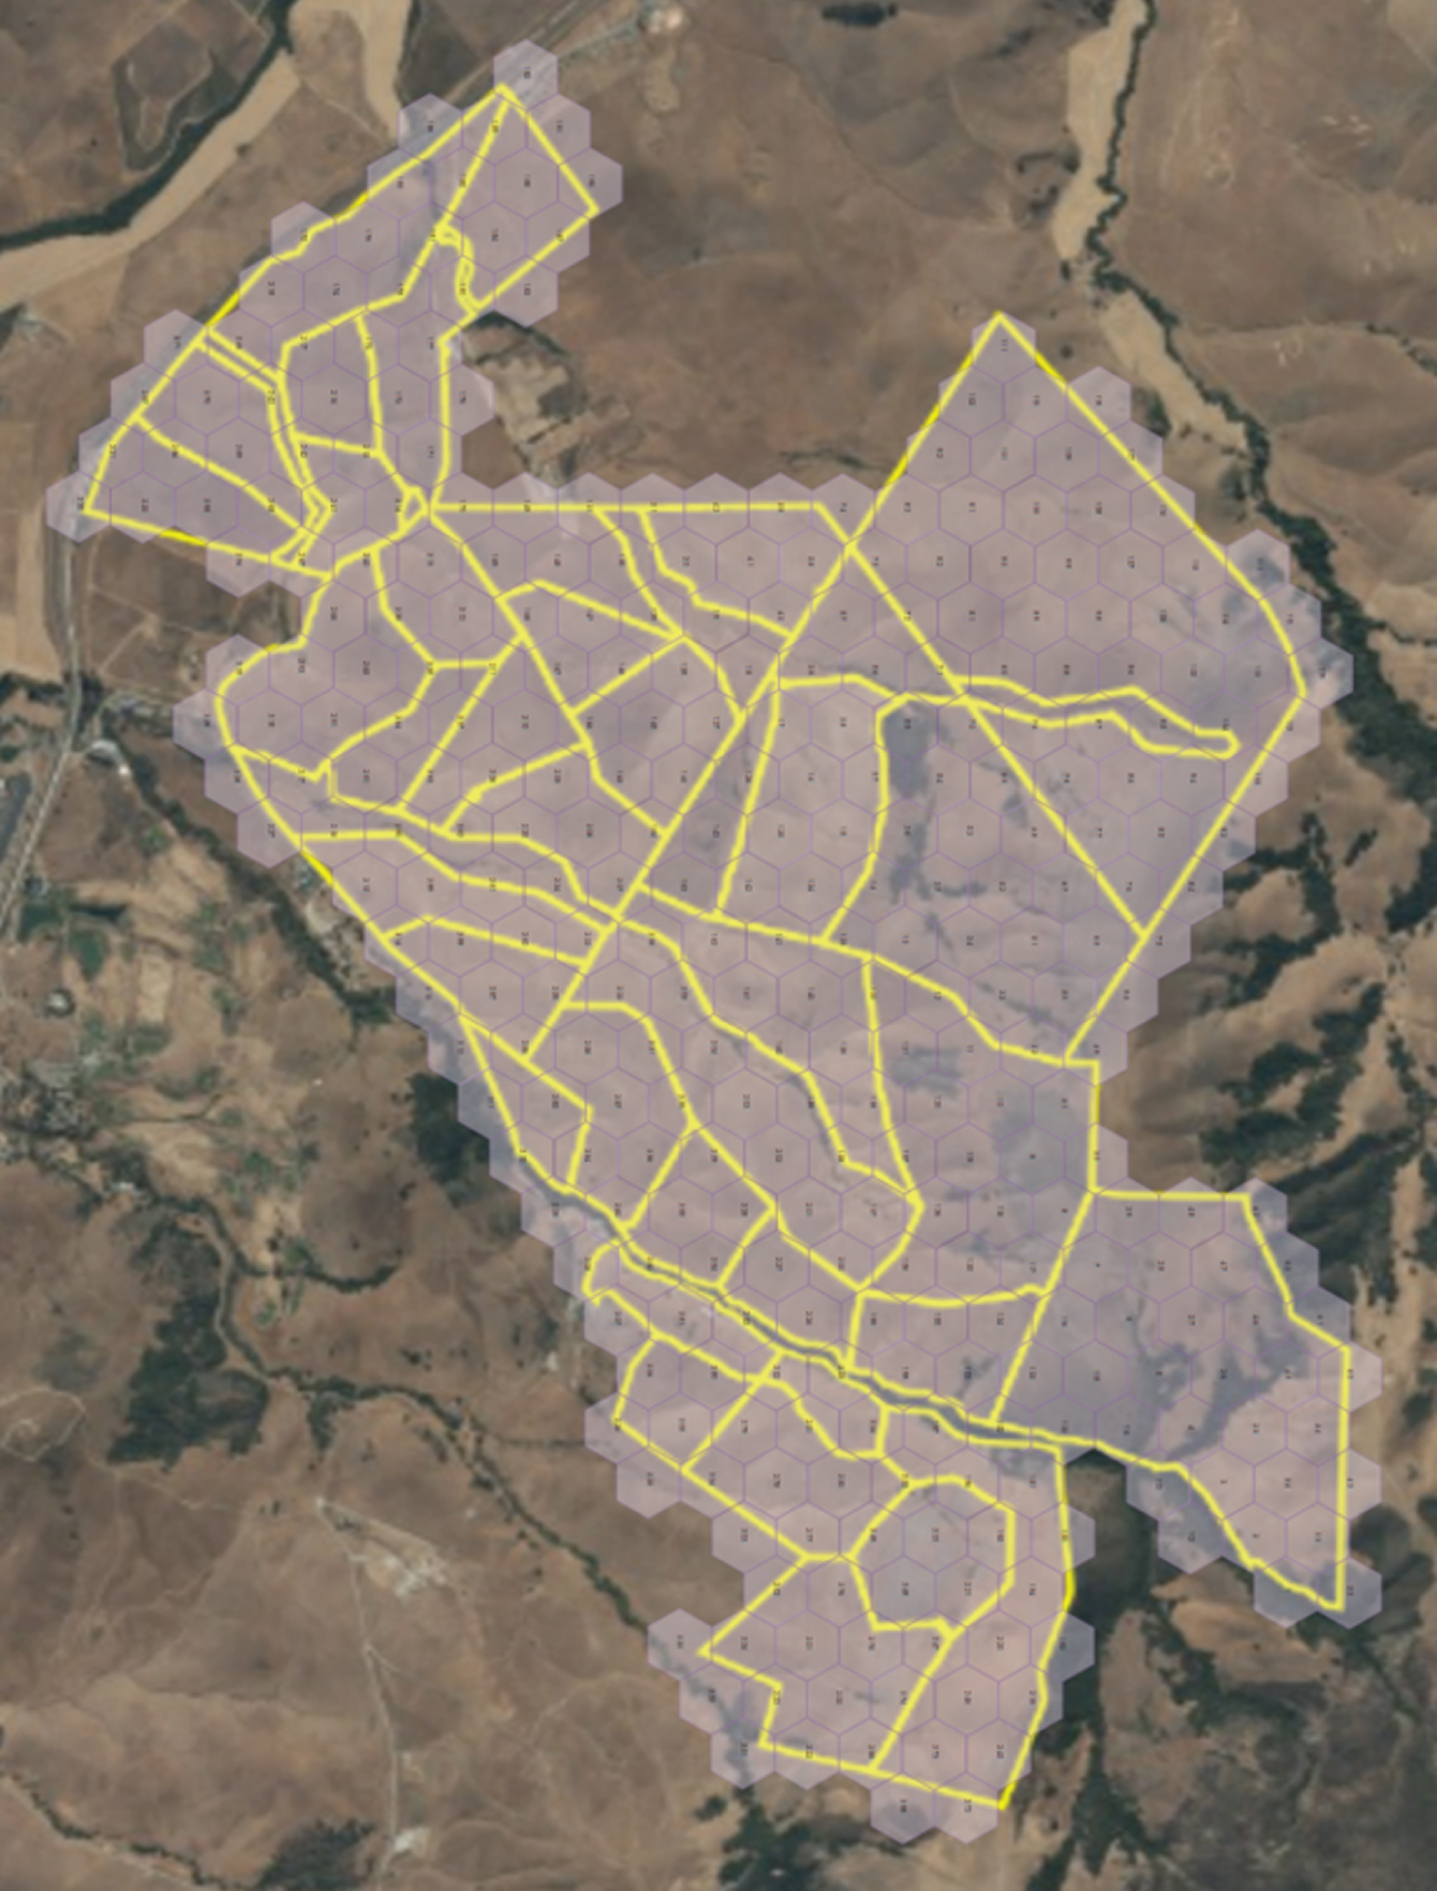 Hexagonal tiling over Walters and Escuela Ranches.